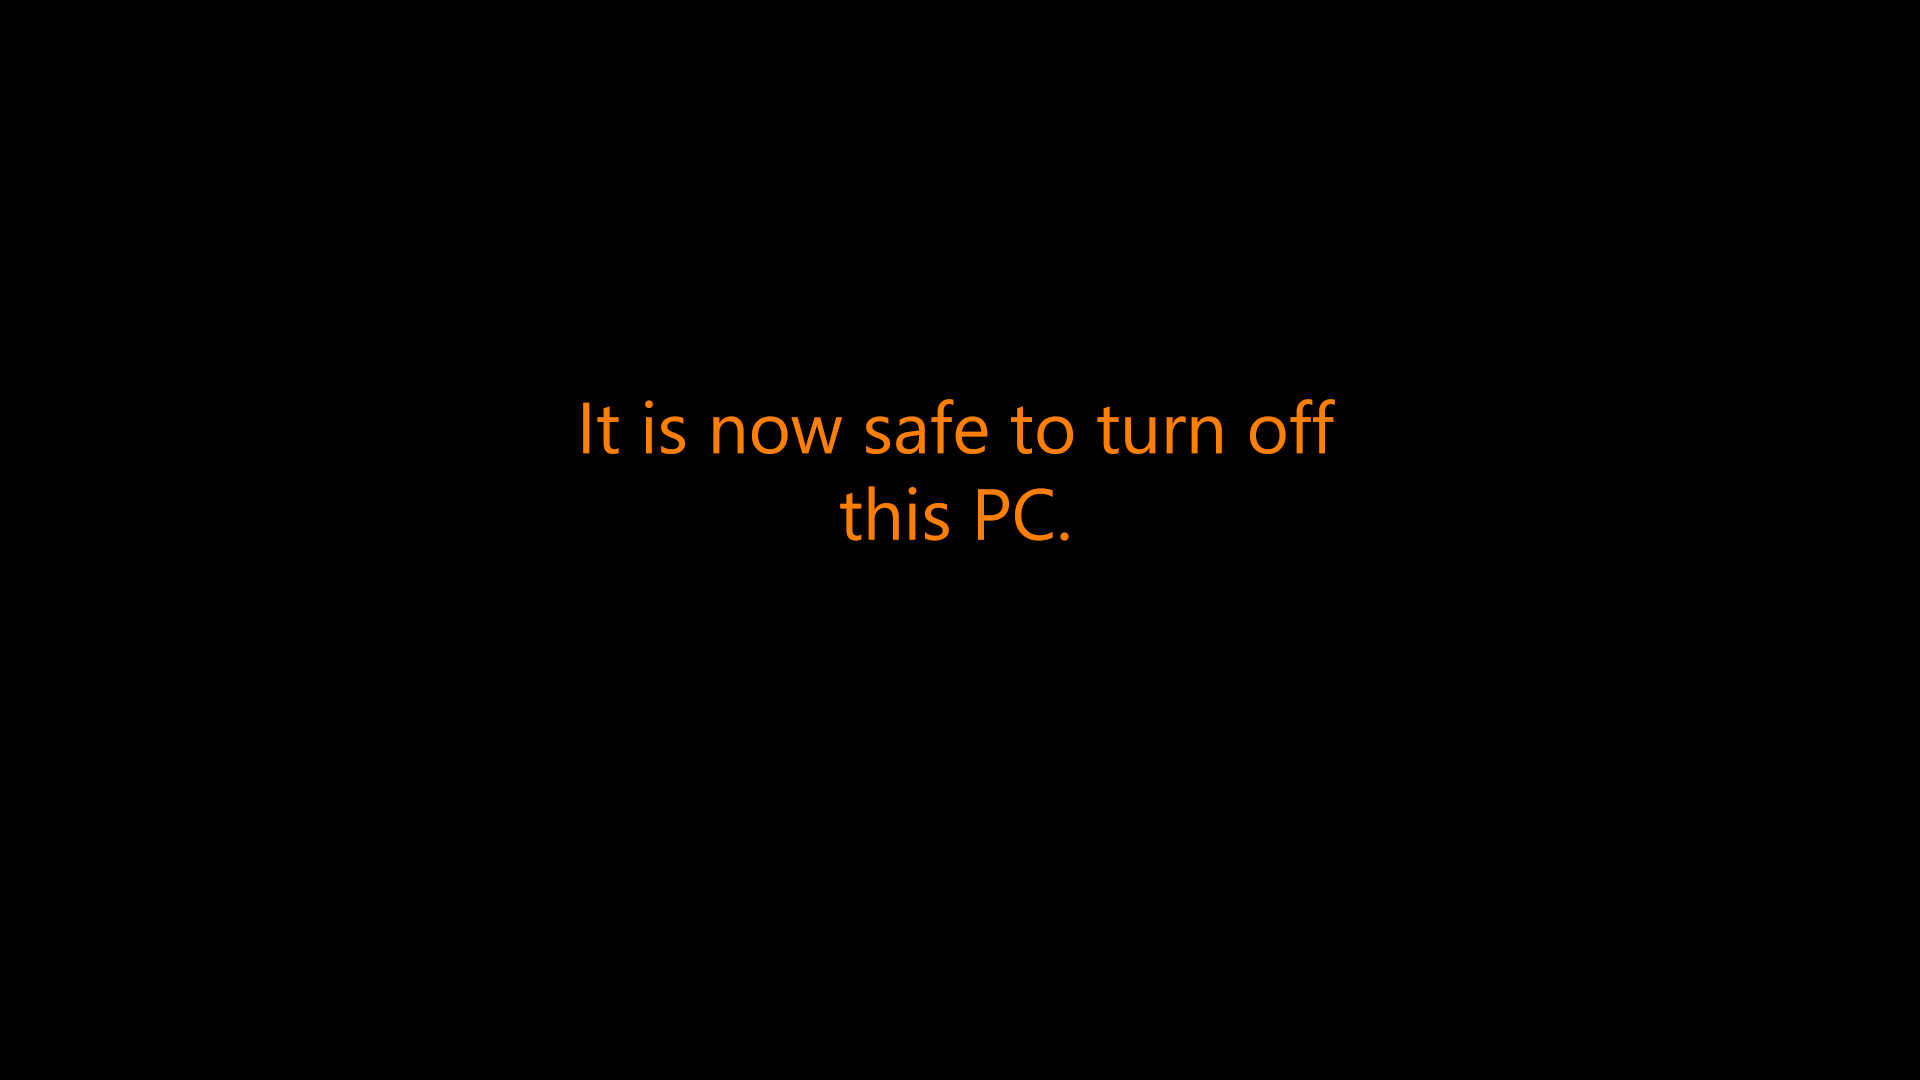 It is now safe to turn off this PC. - Windows 95